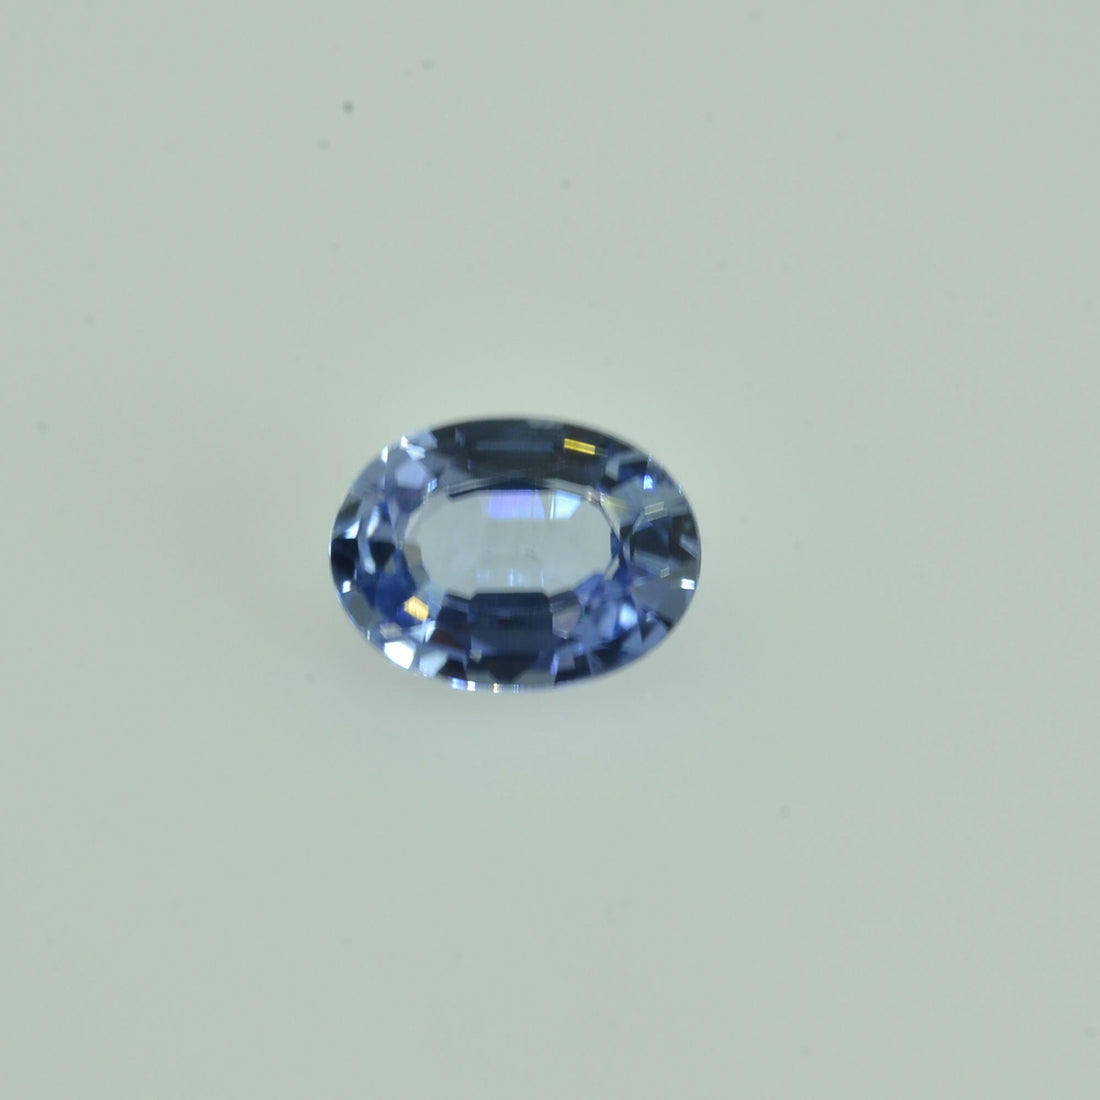 0.72 cts Natural Blue Sapphire Loose Gemstone Oval Cut